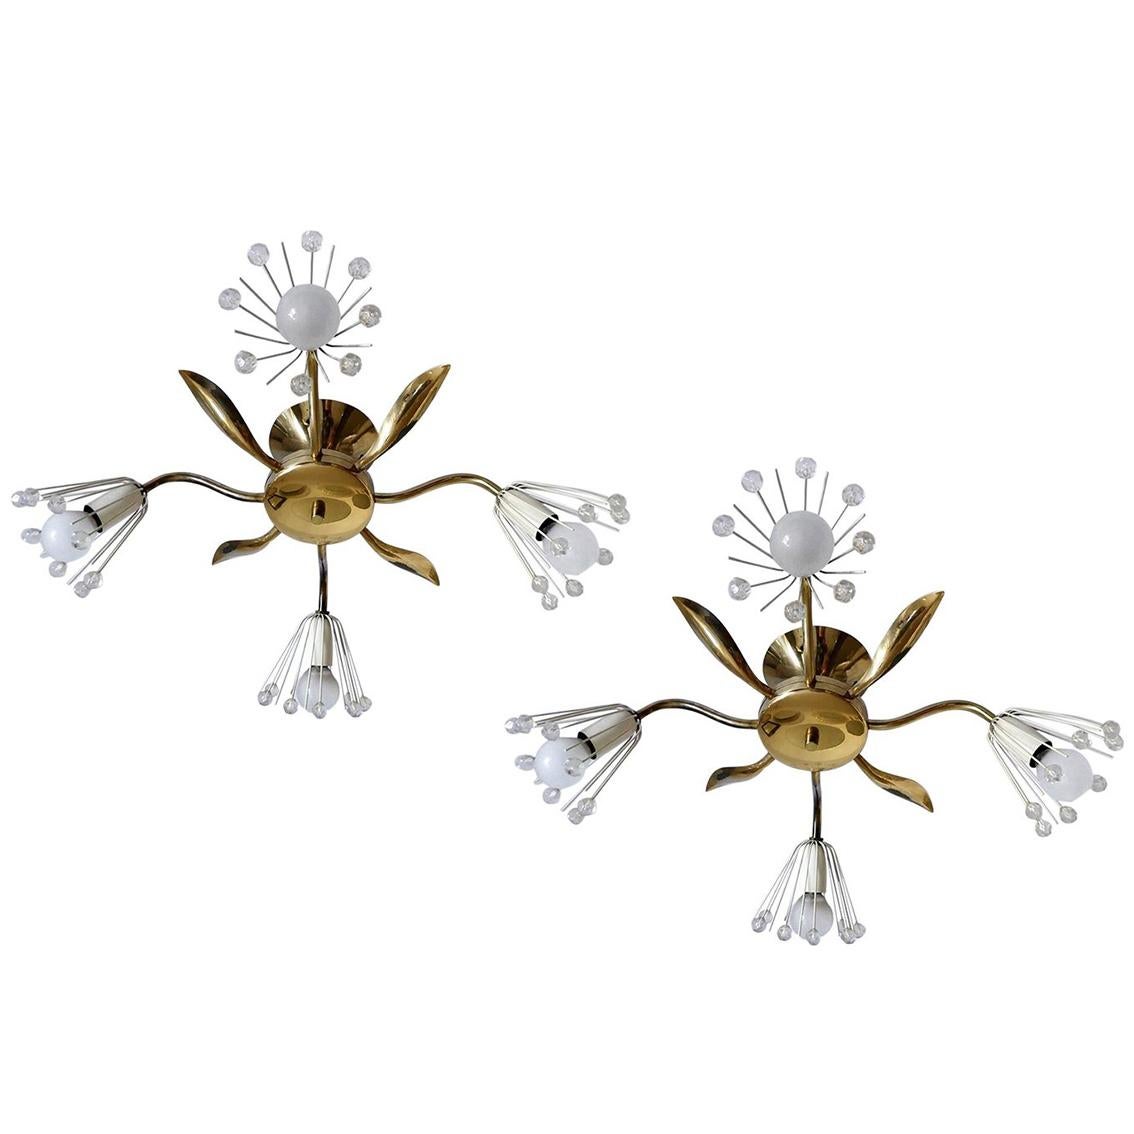 Pair of Austrian Vintage Wall or Ceiling Lights Flush Mounts Chandeliers, 1950s